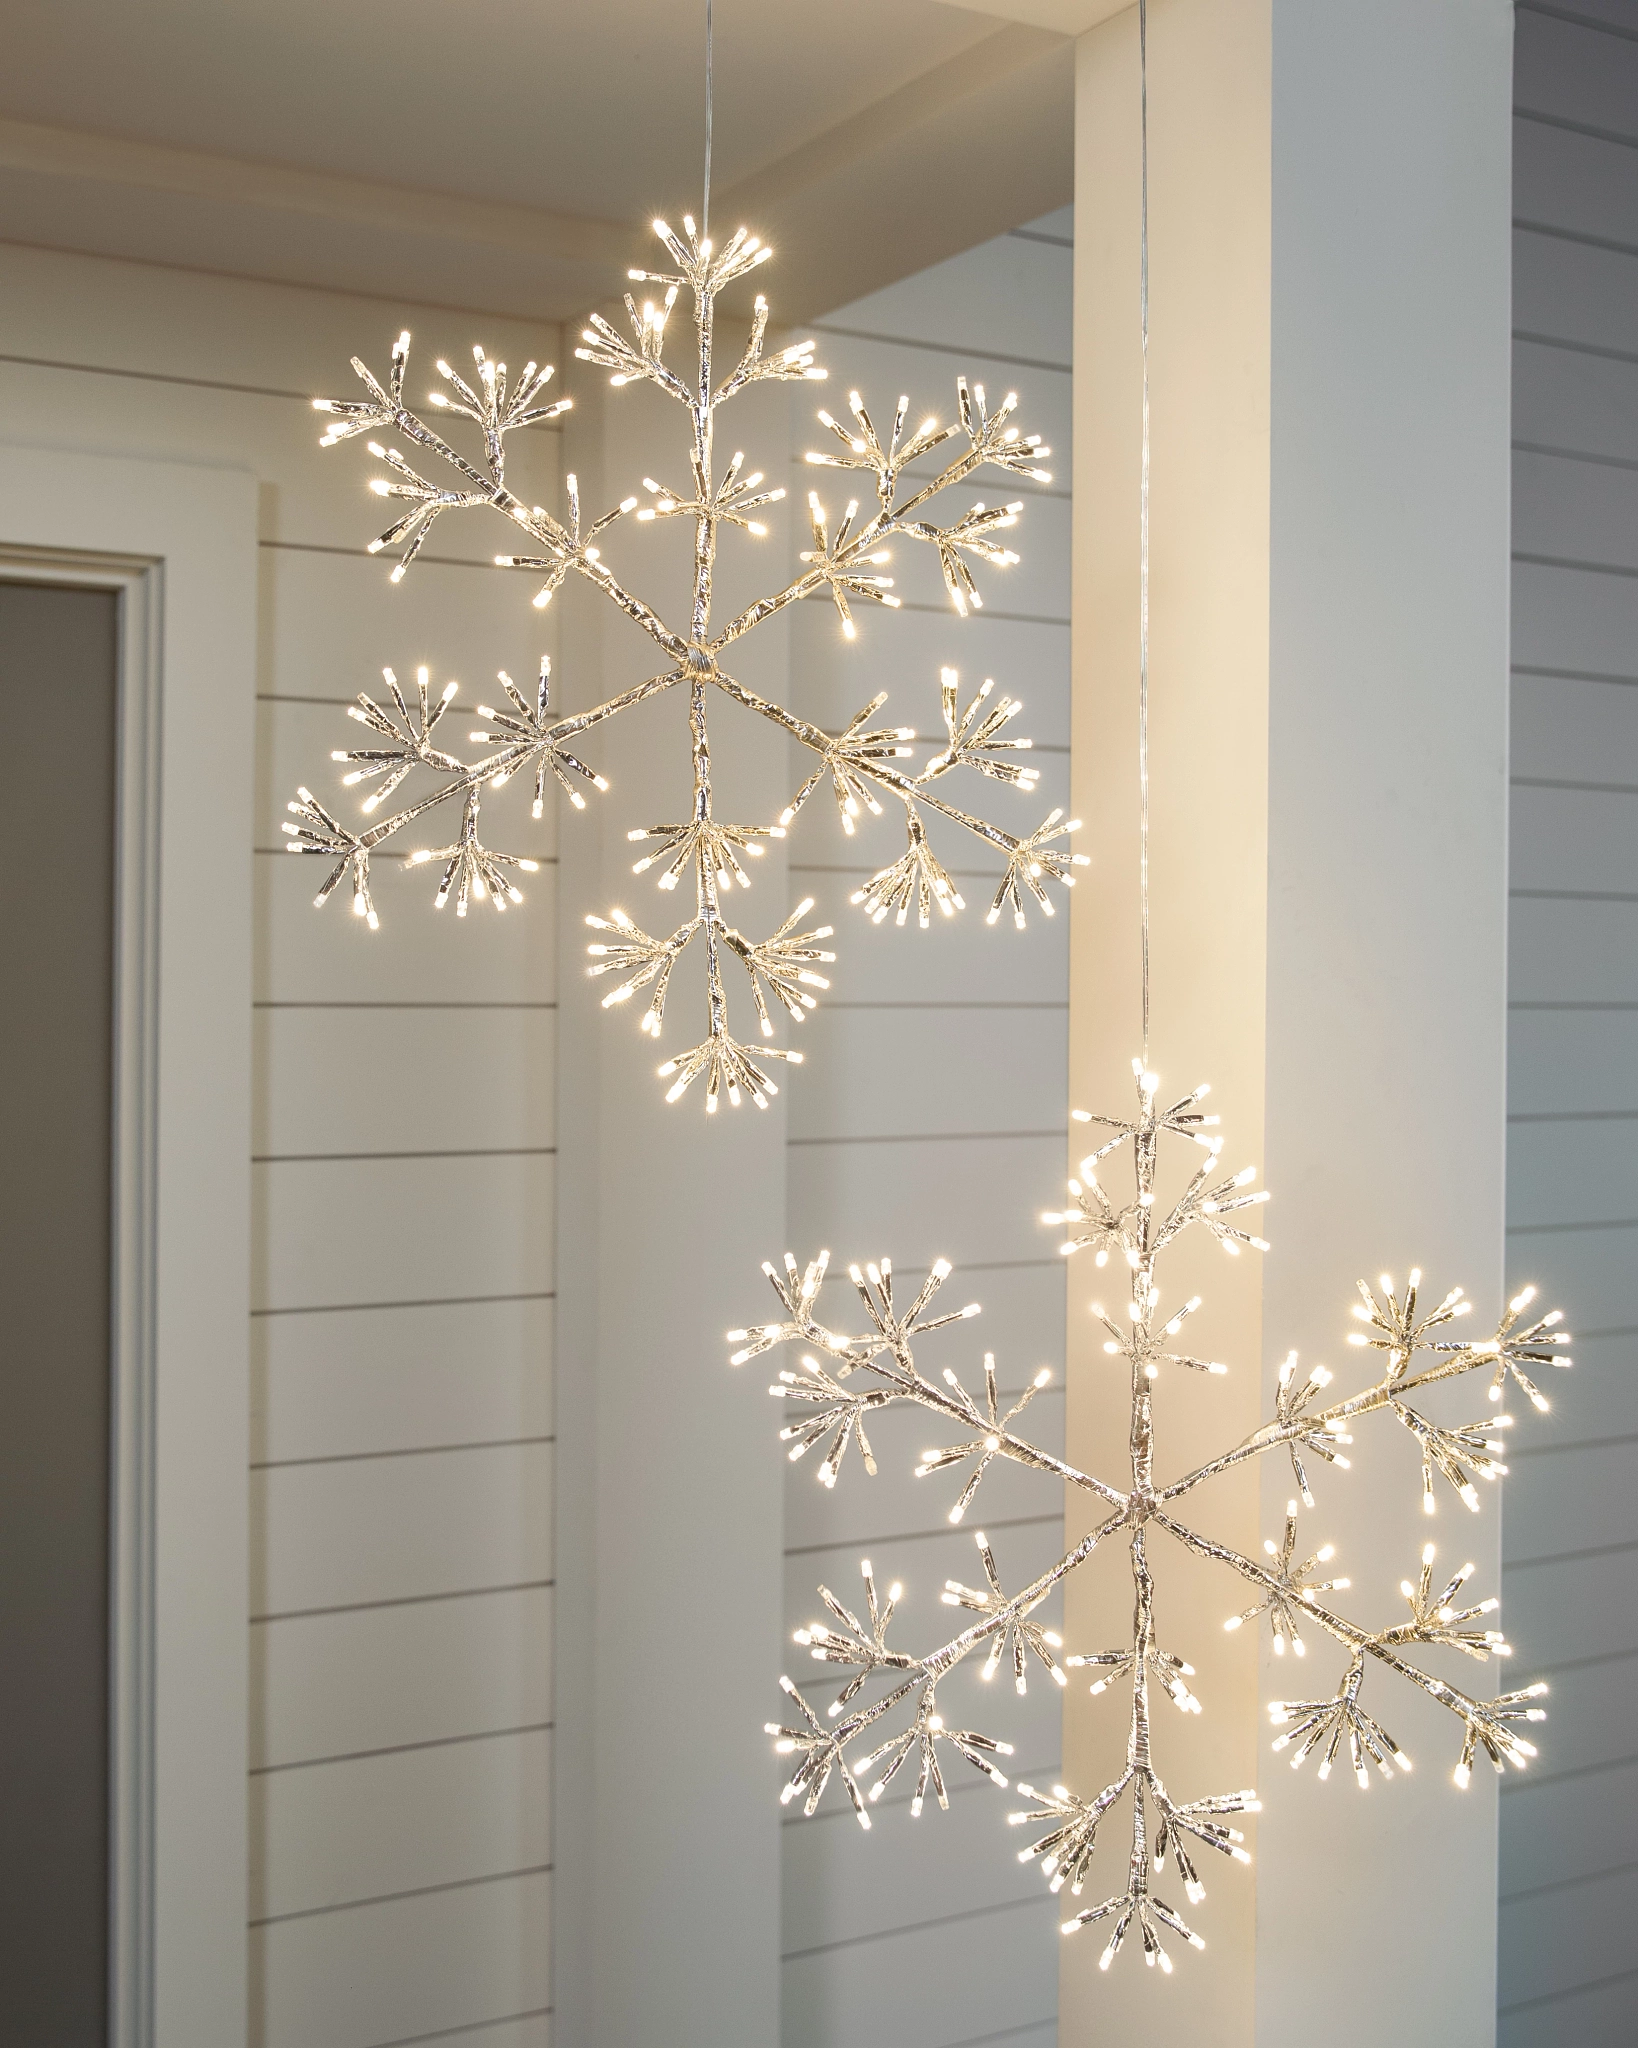 Large Hanging Snowflakes Decorations | Set of 15